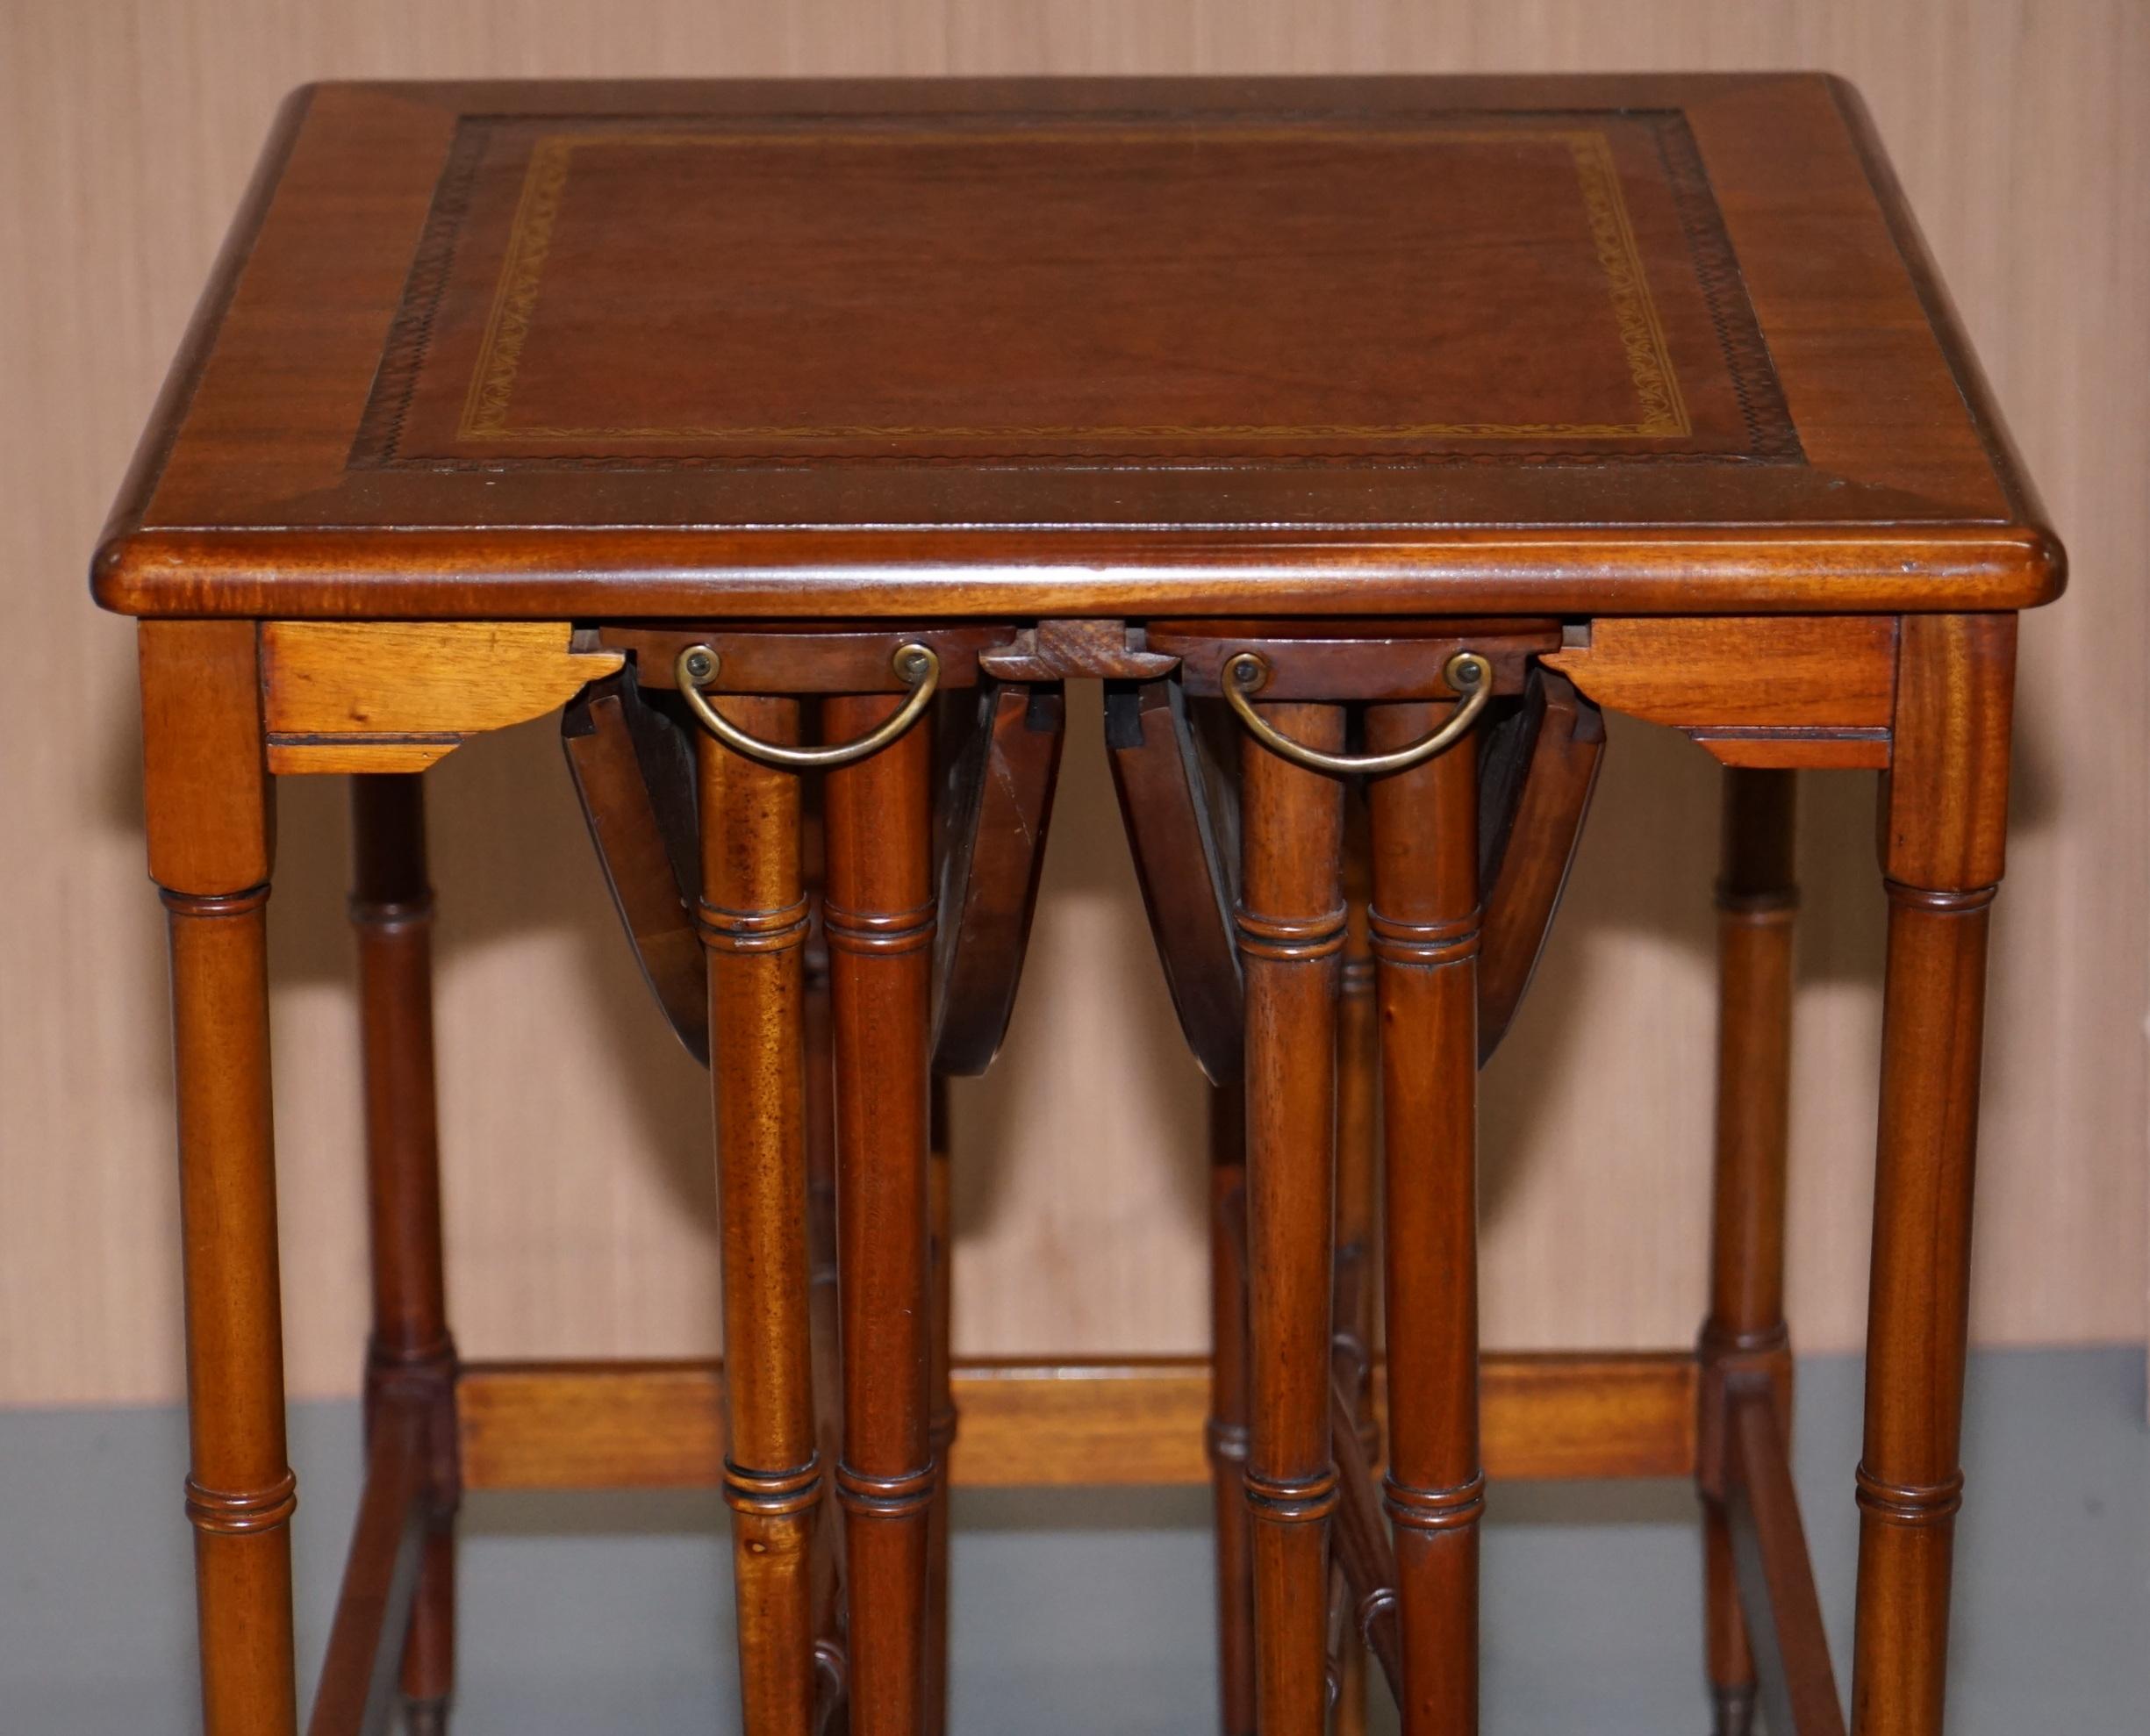 Rare Pair of Military Campaign Side Tables with Two Folded Round Tables Nested 1